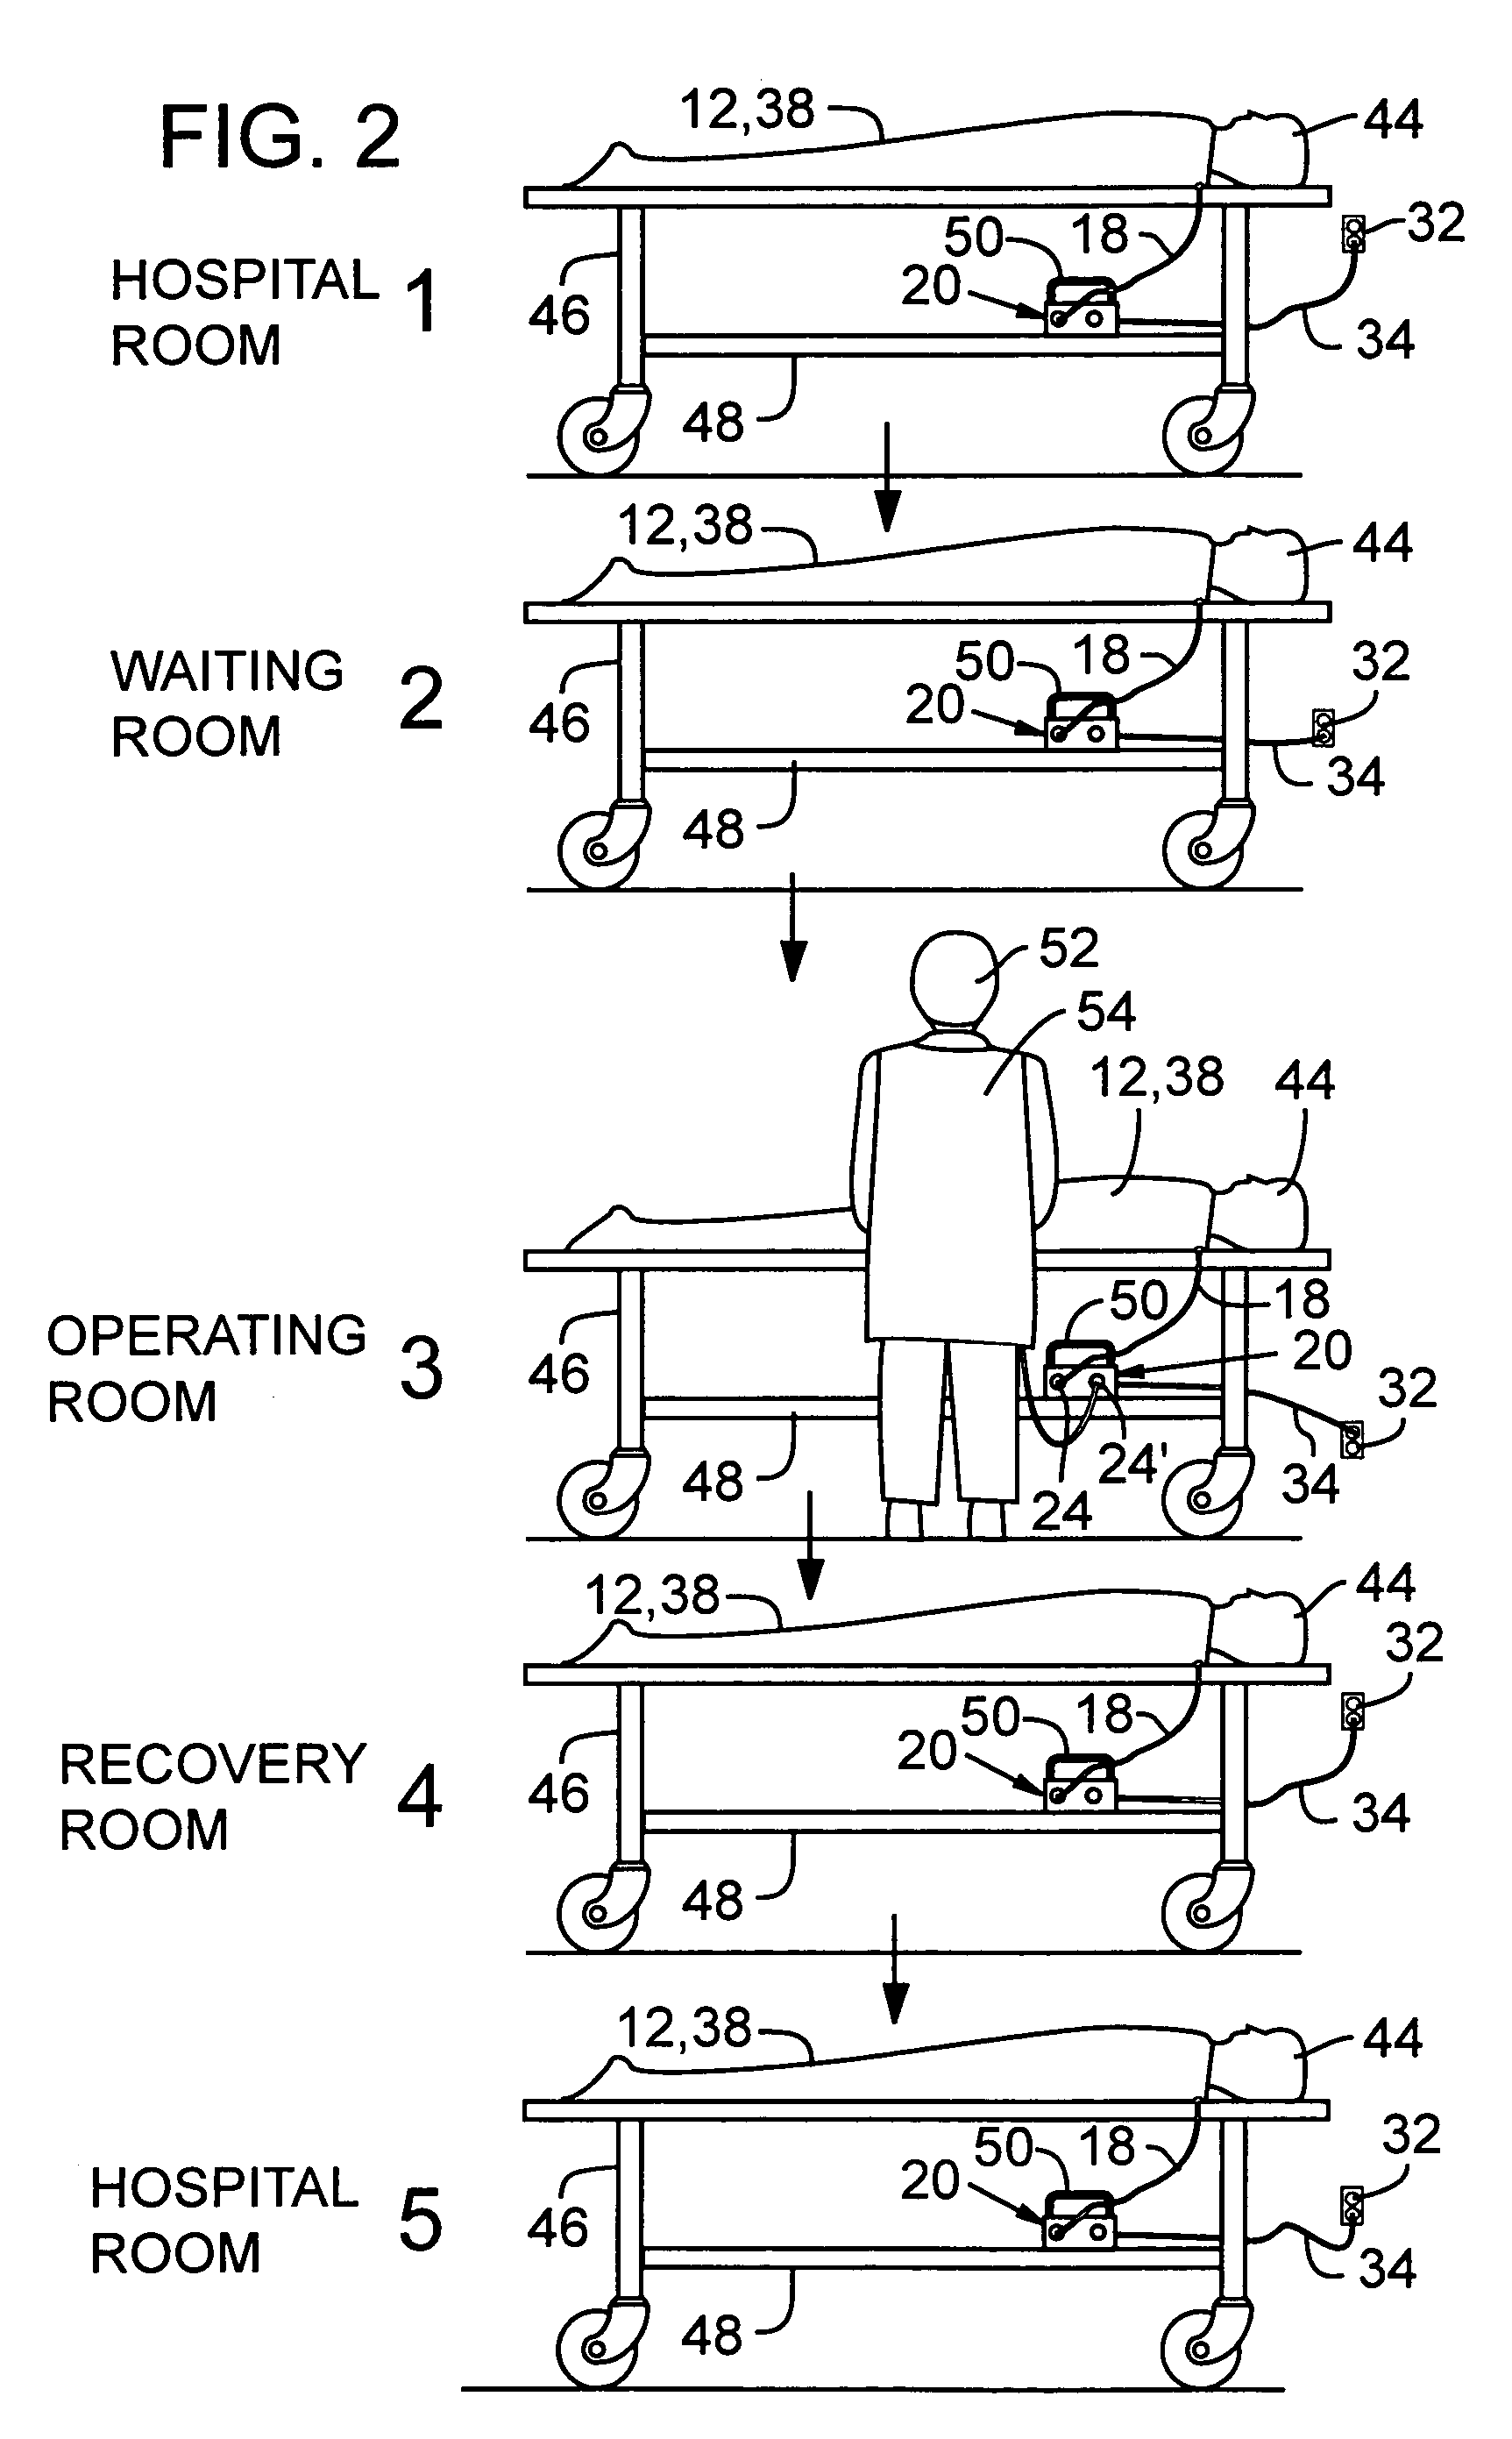 Personnel heating assembly